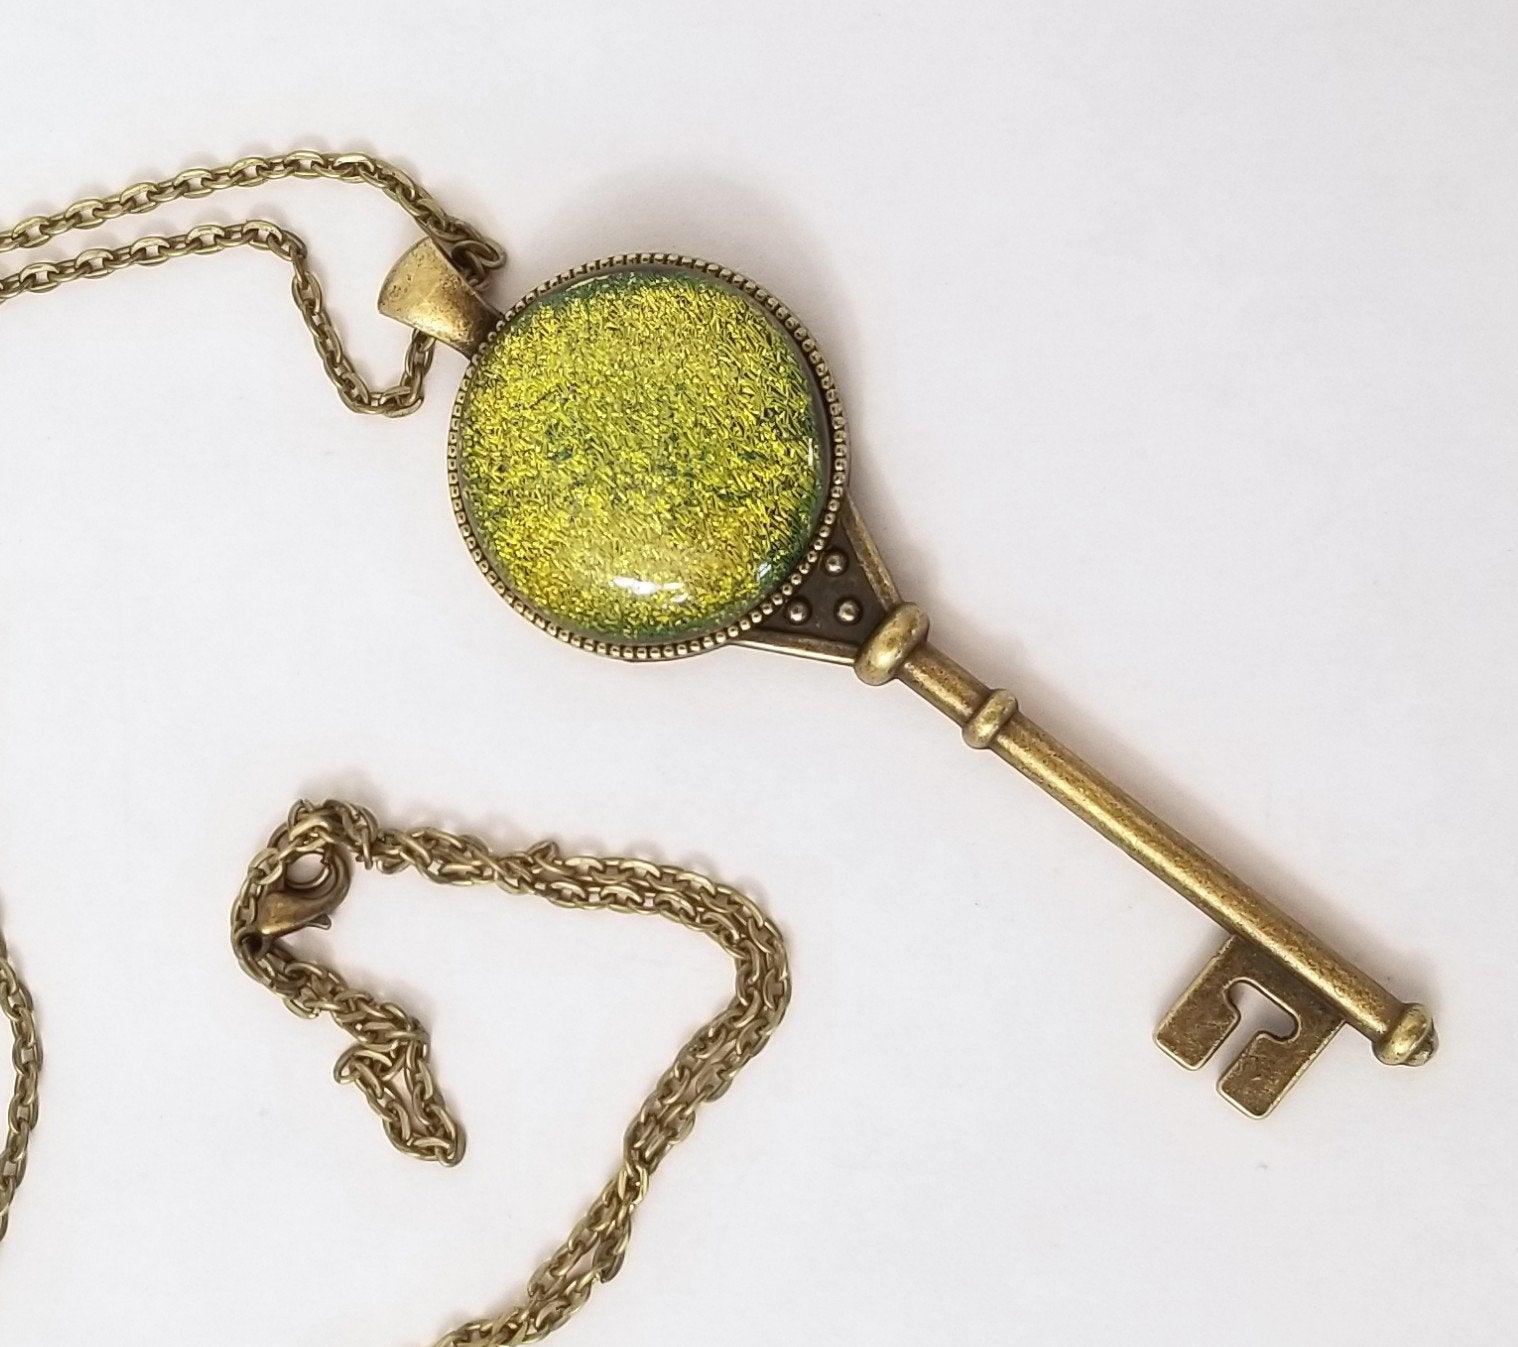 Antiqued Brass  Skeleton Key necklace with Fused Glass Green Dichroic cabochon on 24 inch brass plated chain